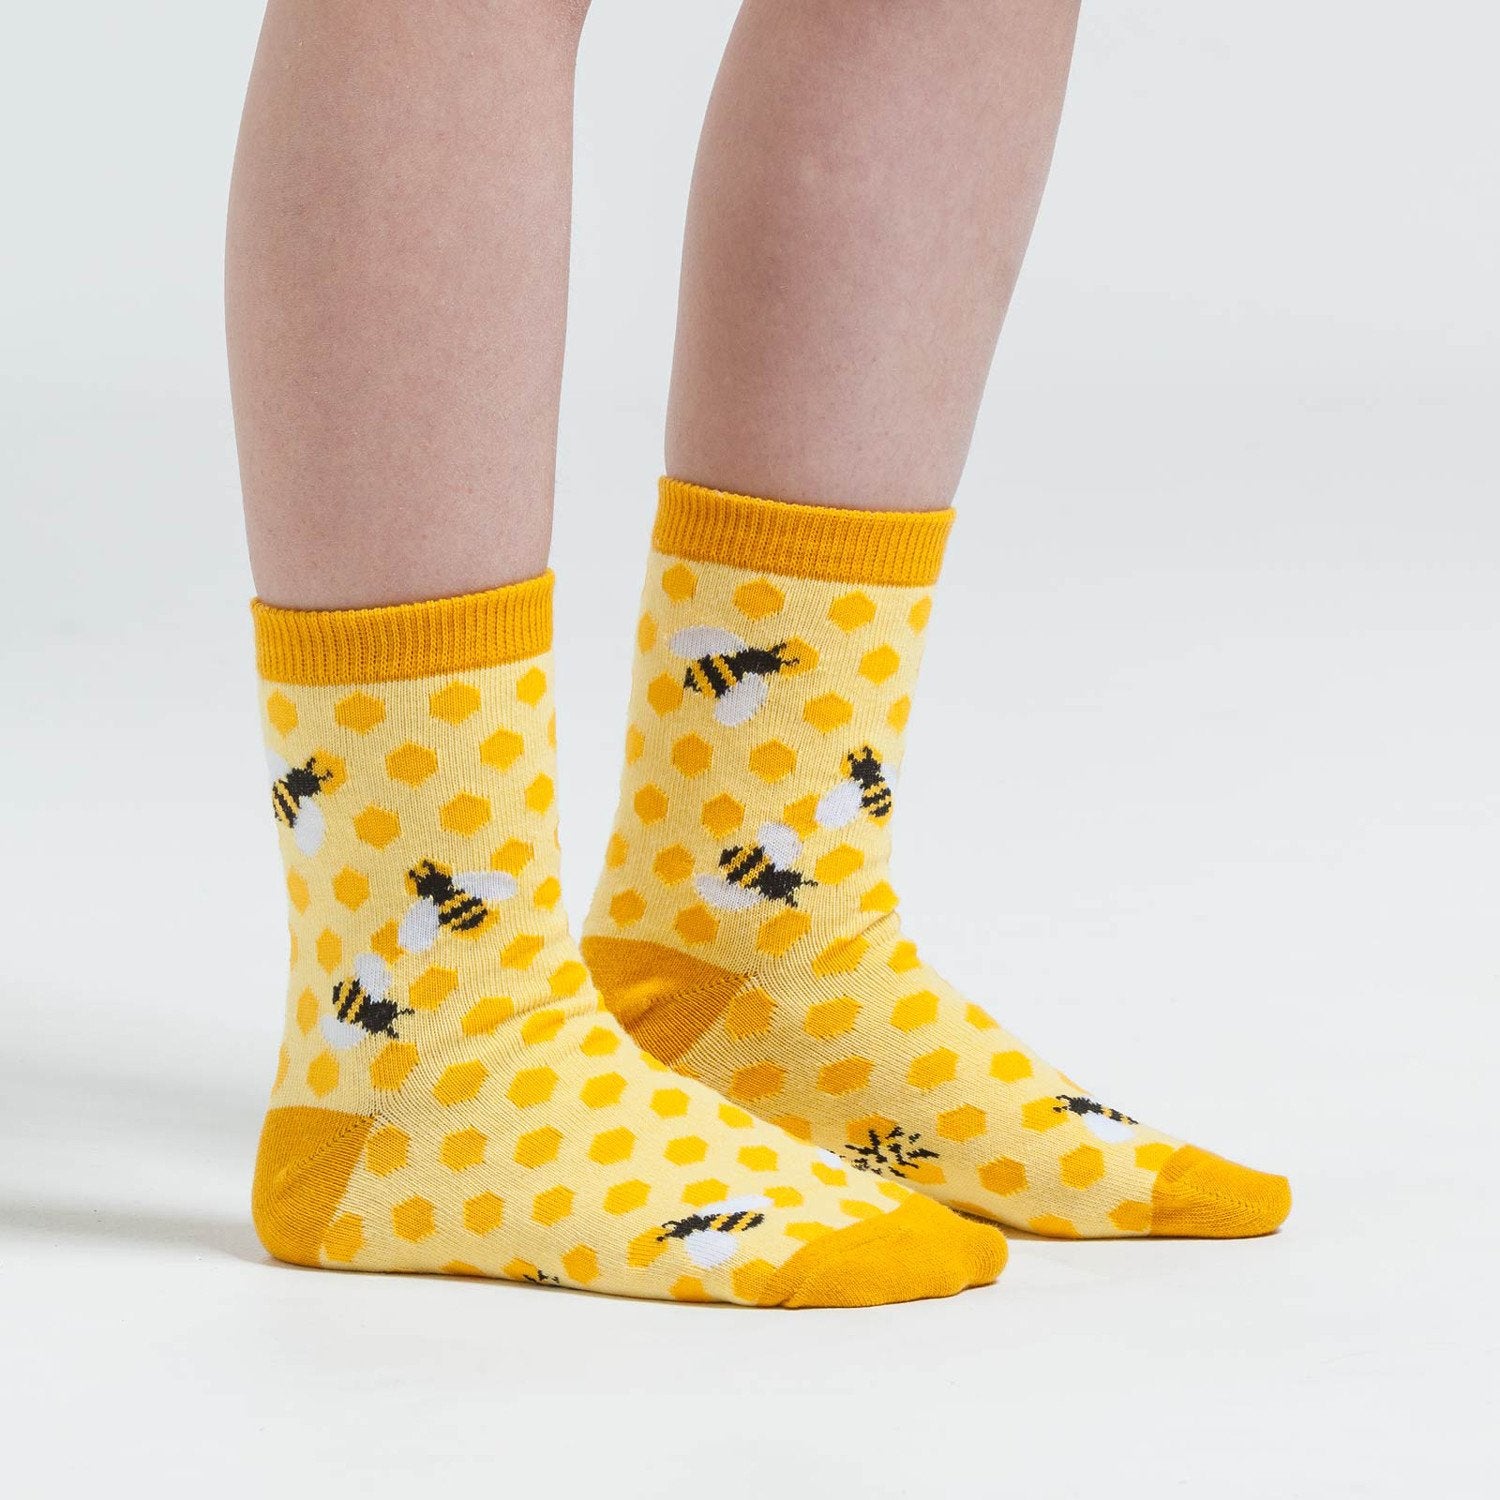 Sunshine yellow sock with honeycomb design and cute buzzy bees - The Sockery